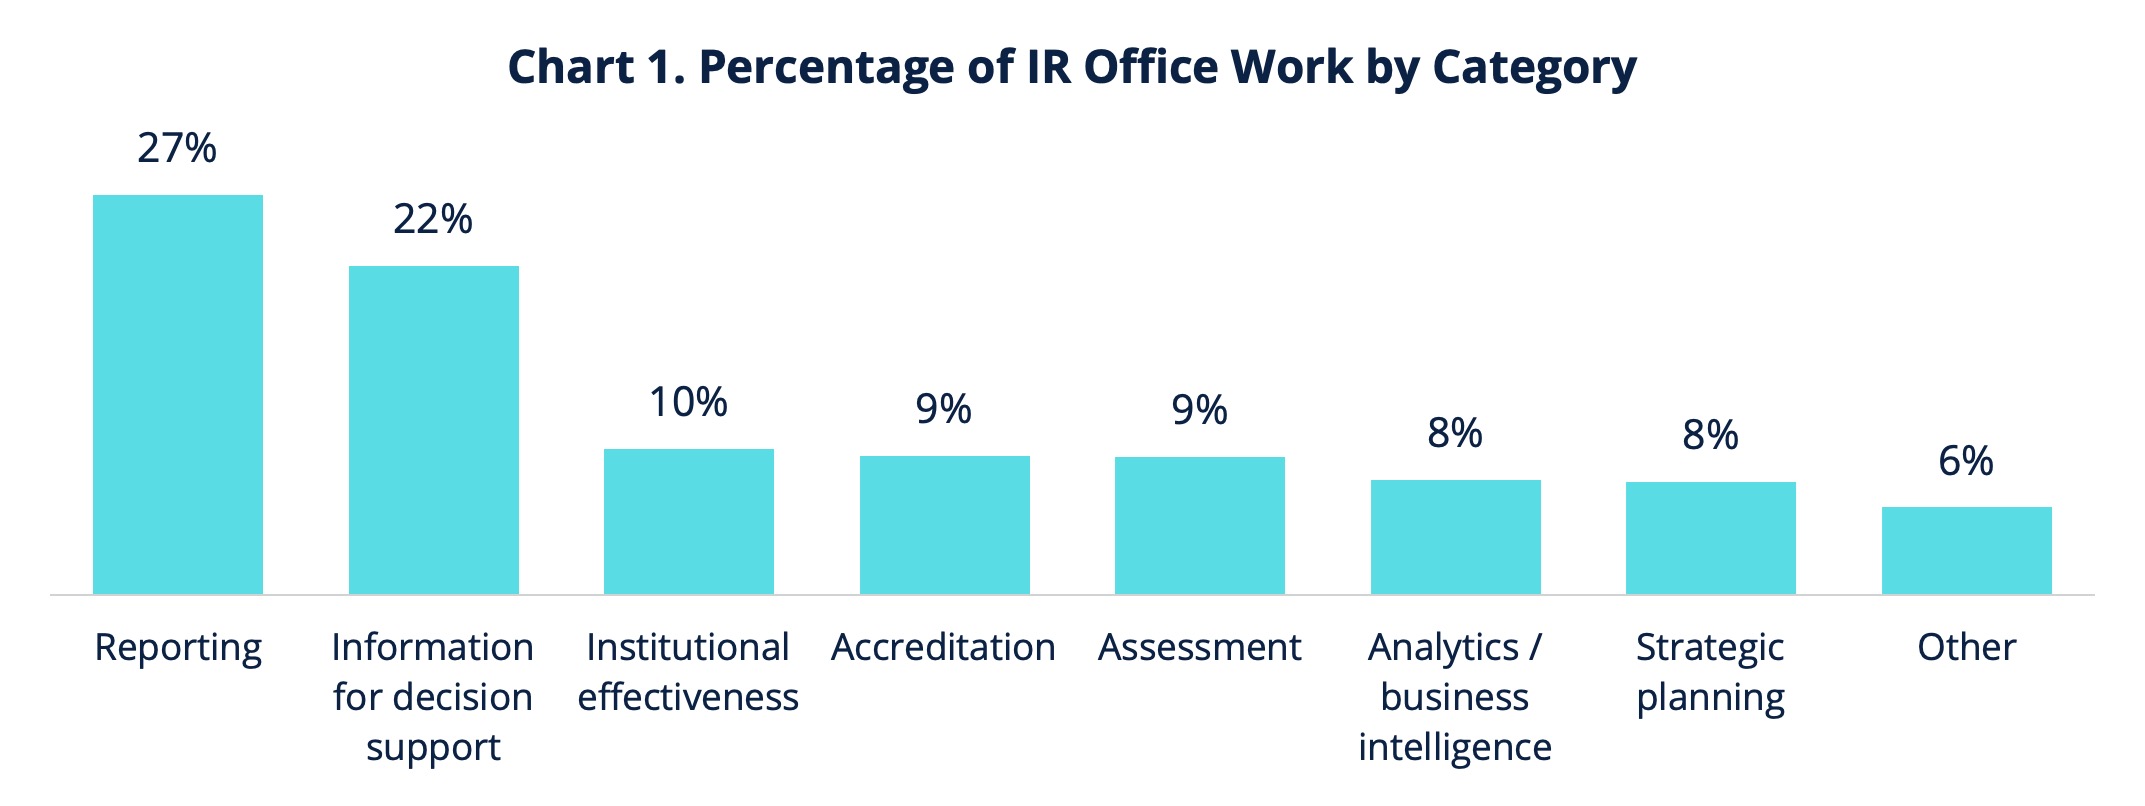 Chart 1. Percentage of IR Office Work by Category